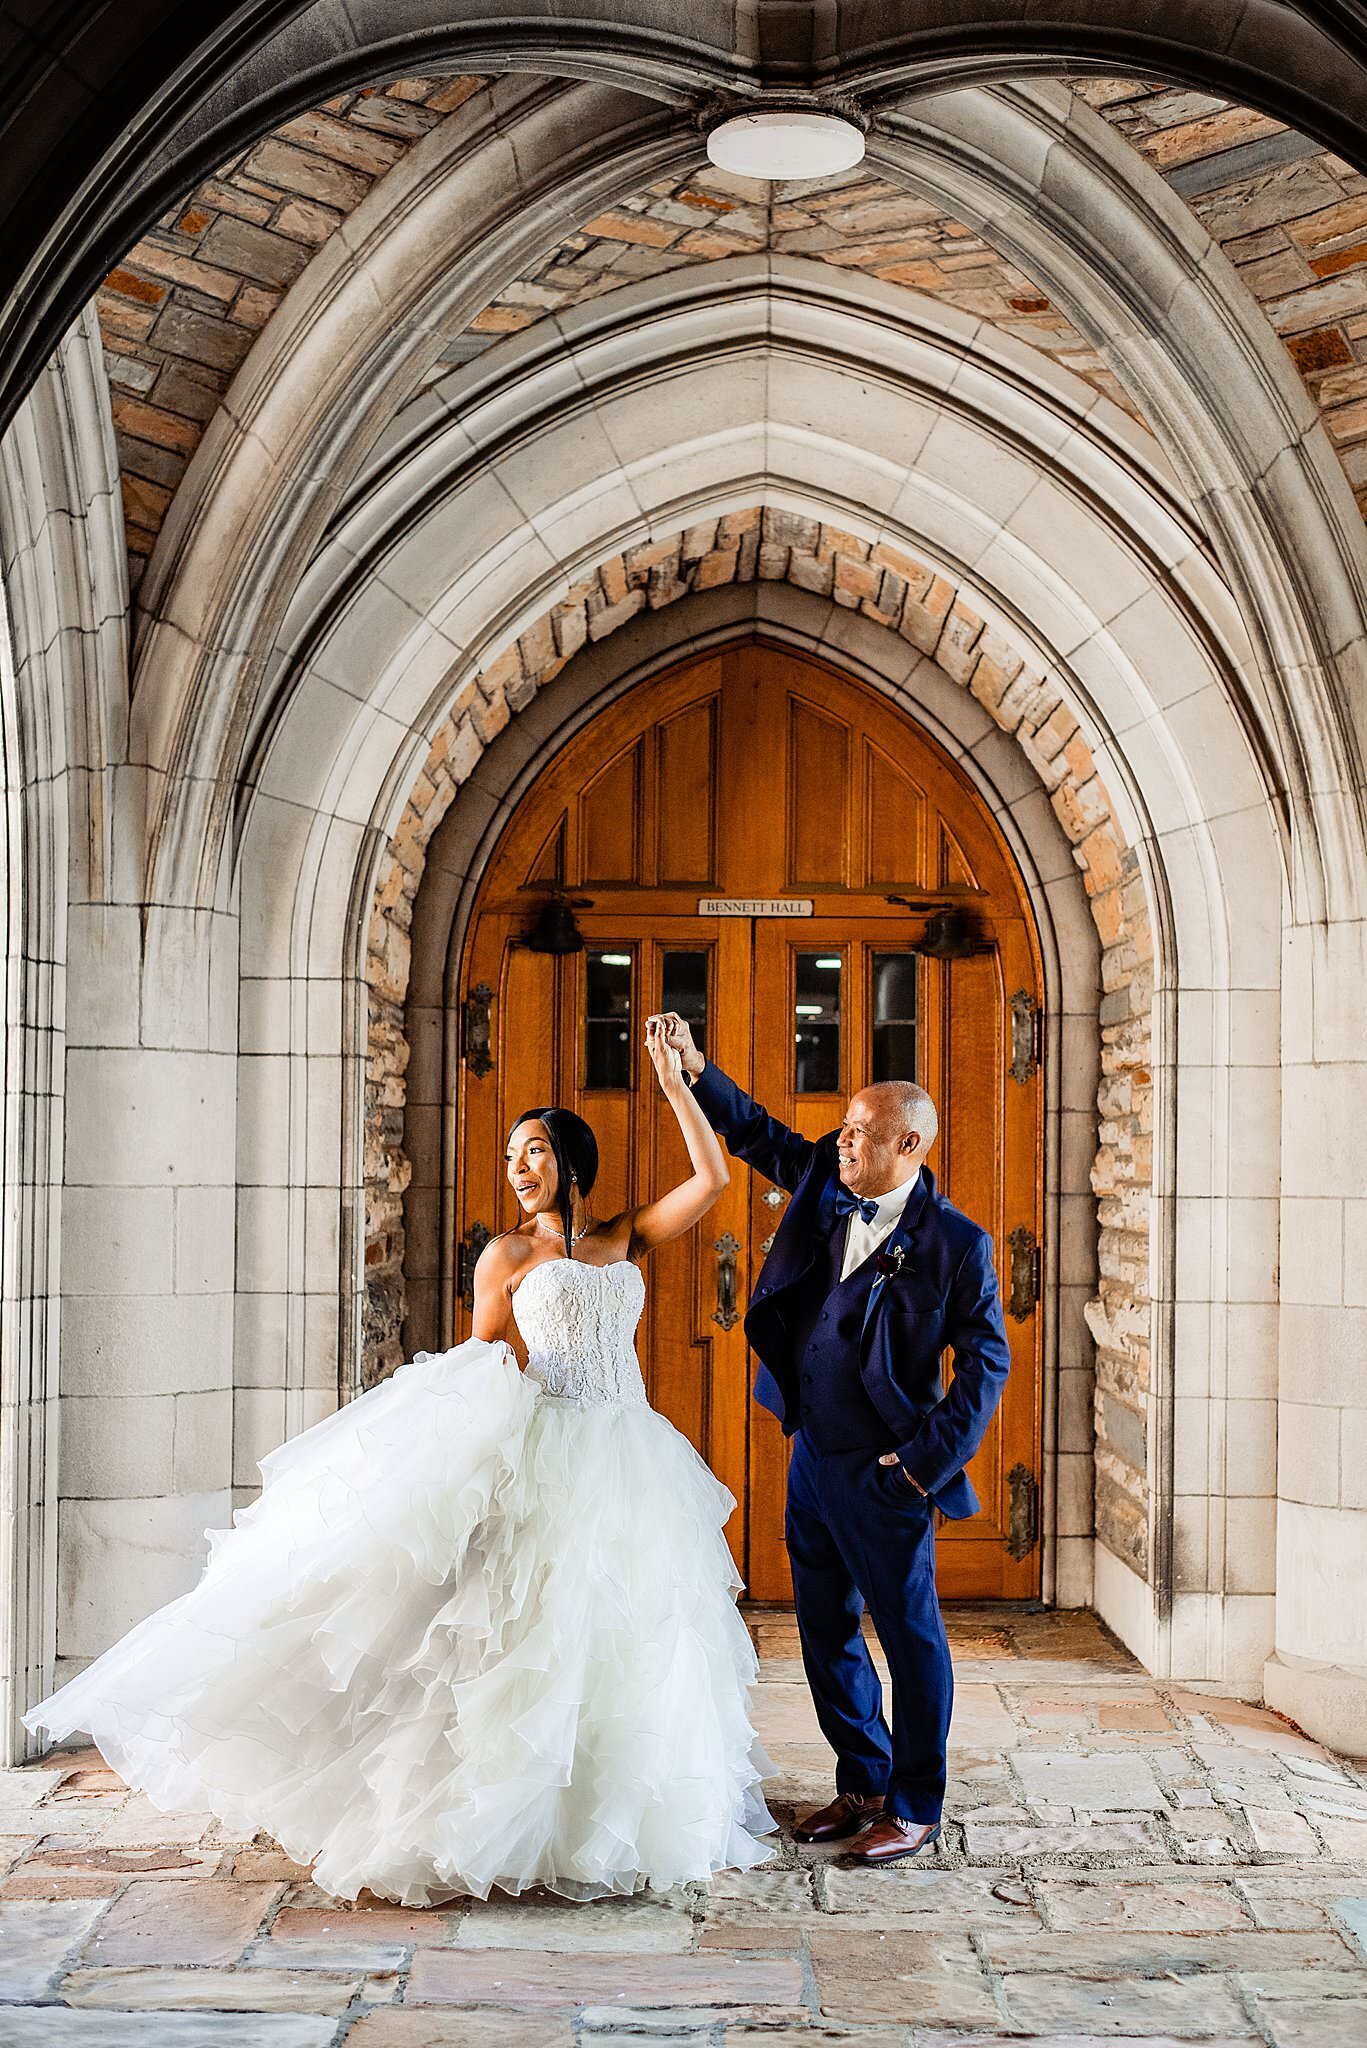 Couple dancing together under iconic archways at Scarritt Bennett Center